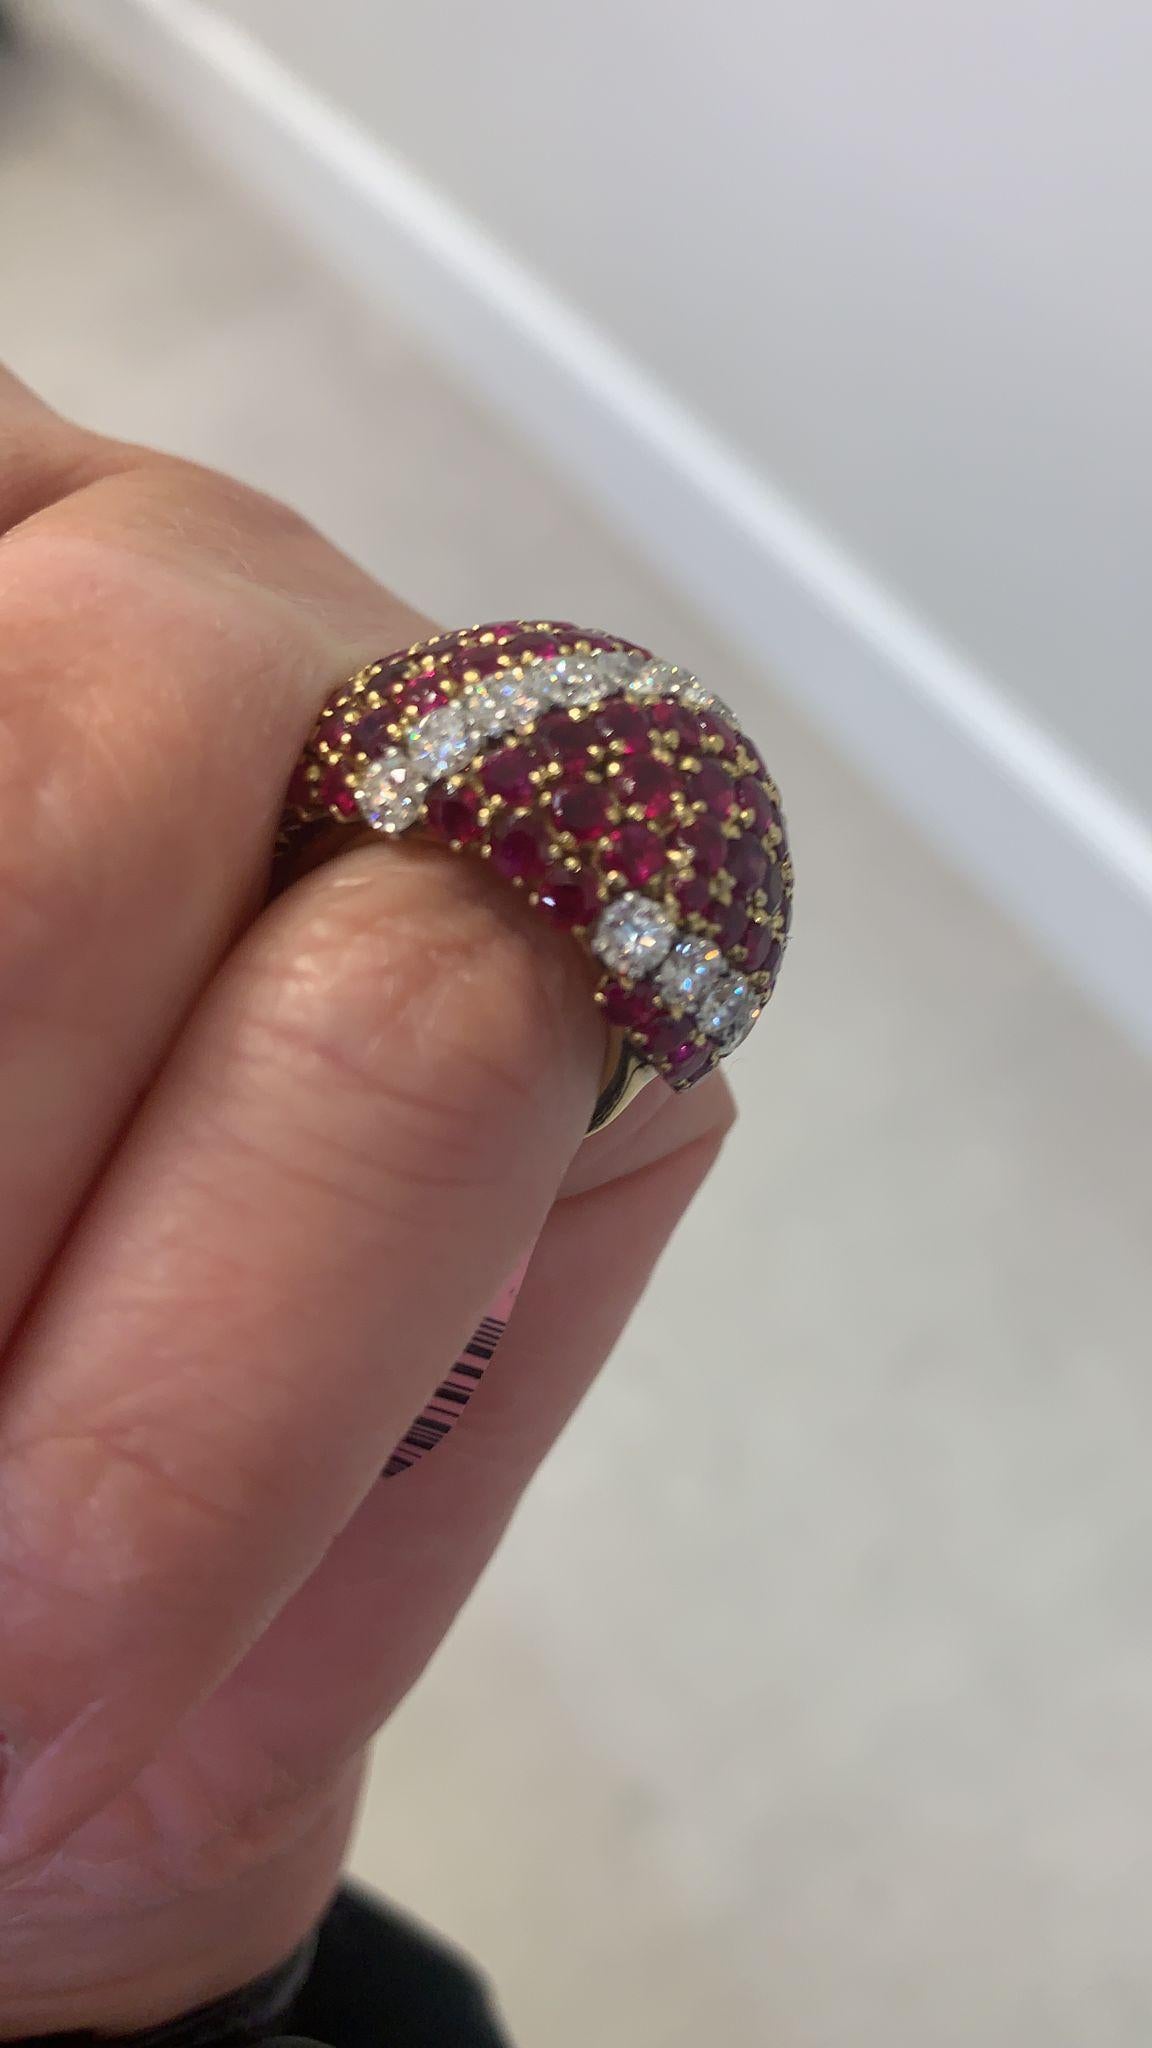 Van Cleef & Arpels Vintage 1950s 'Province' Ruby Bombe Ring In Excellent Condition For Sale In New York, NY